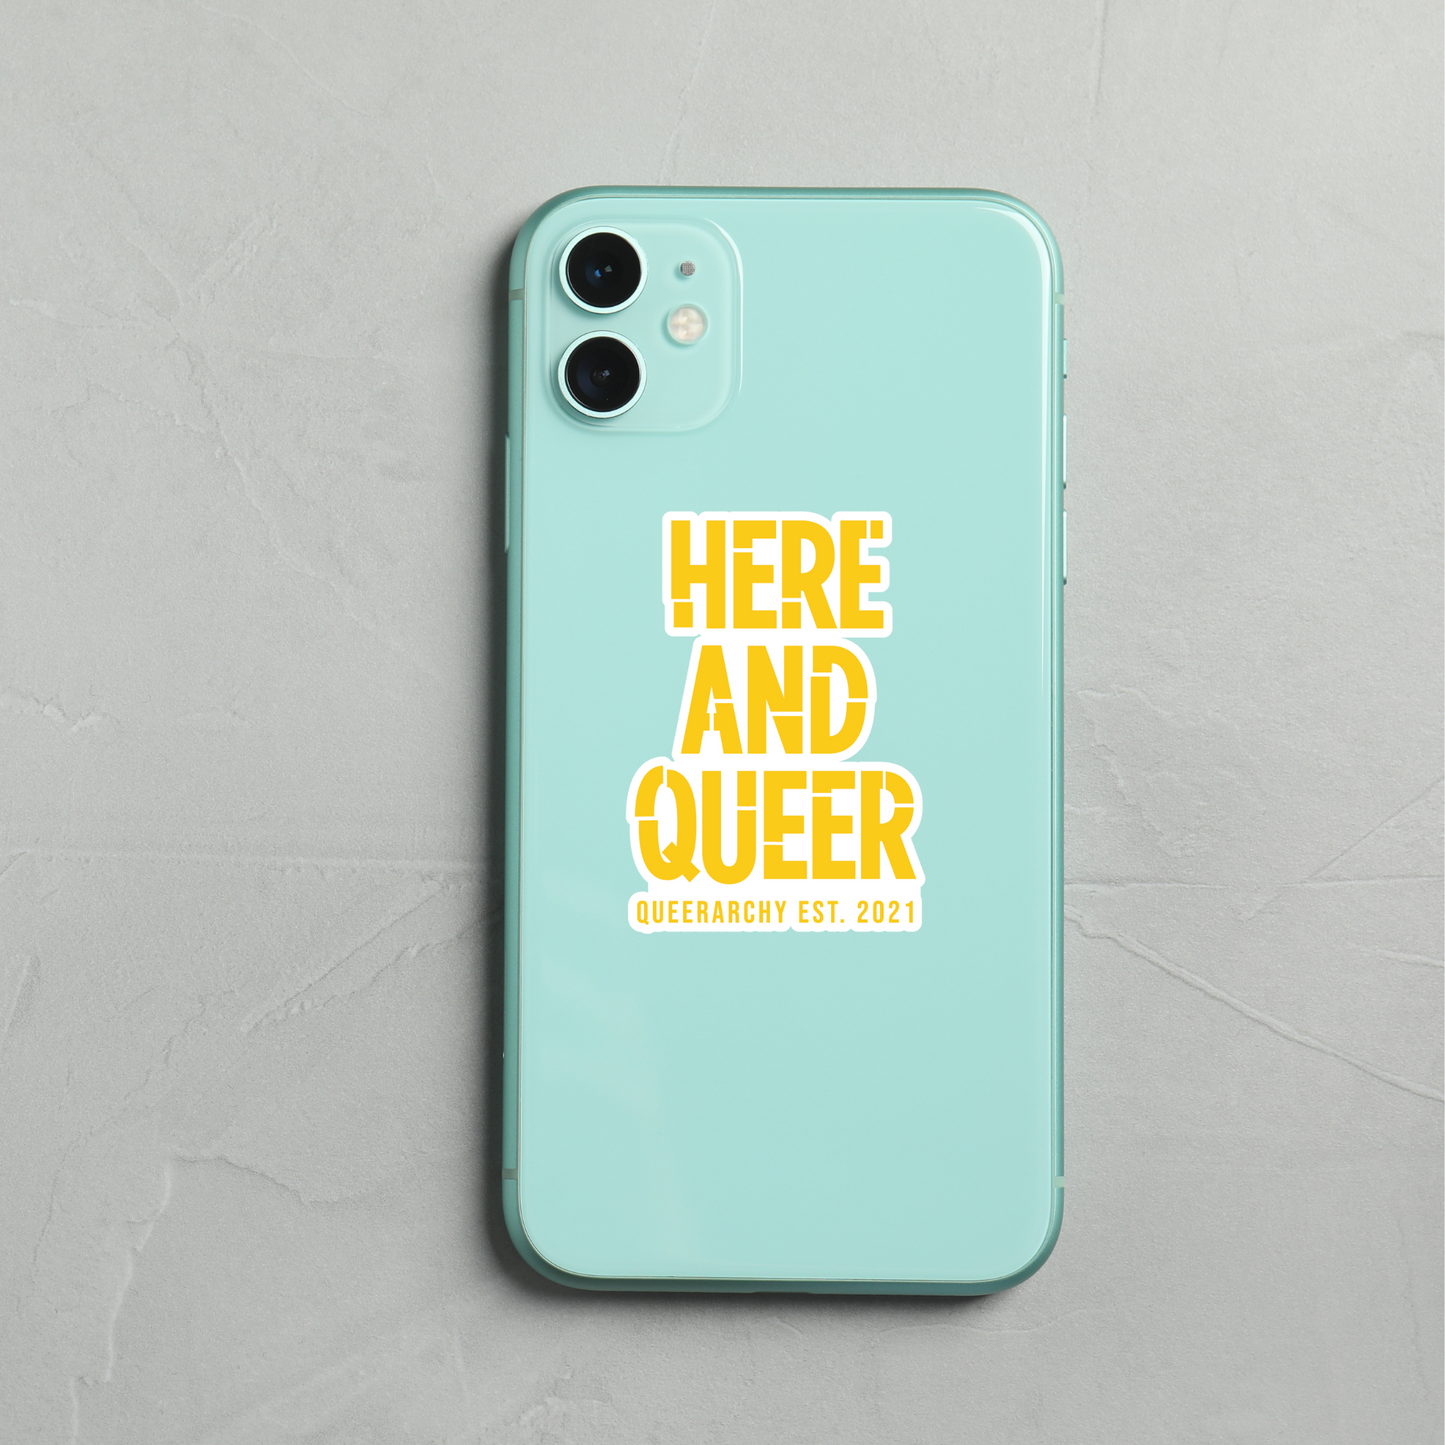 Here And Queer Vinyl Sticker